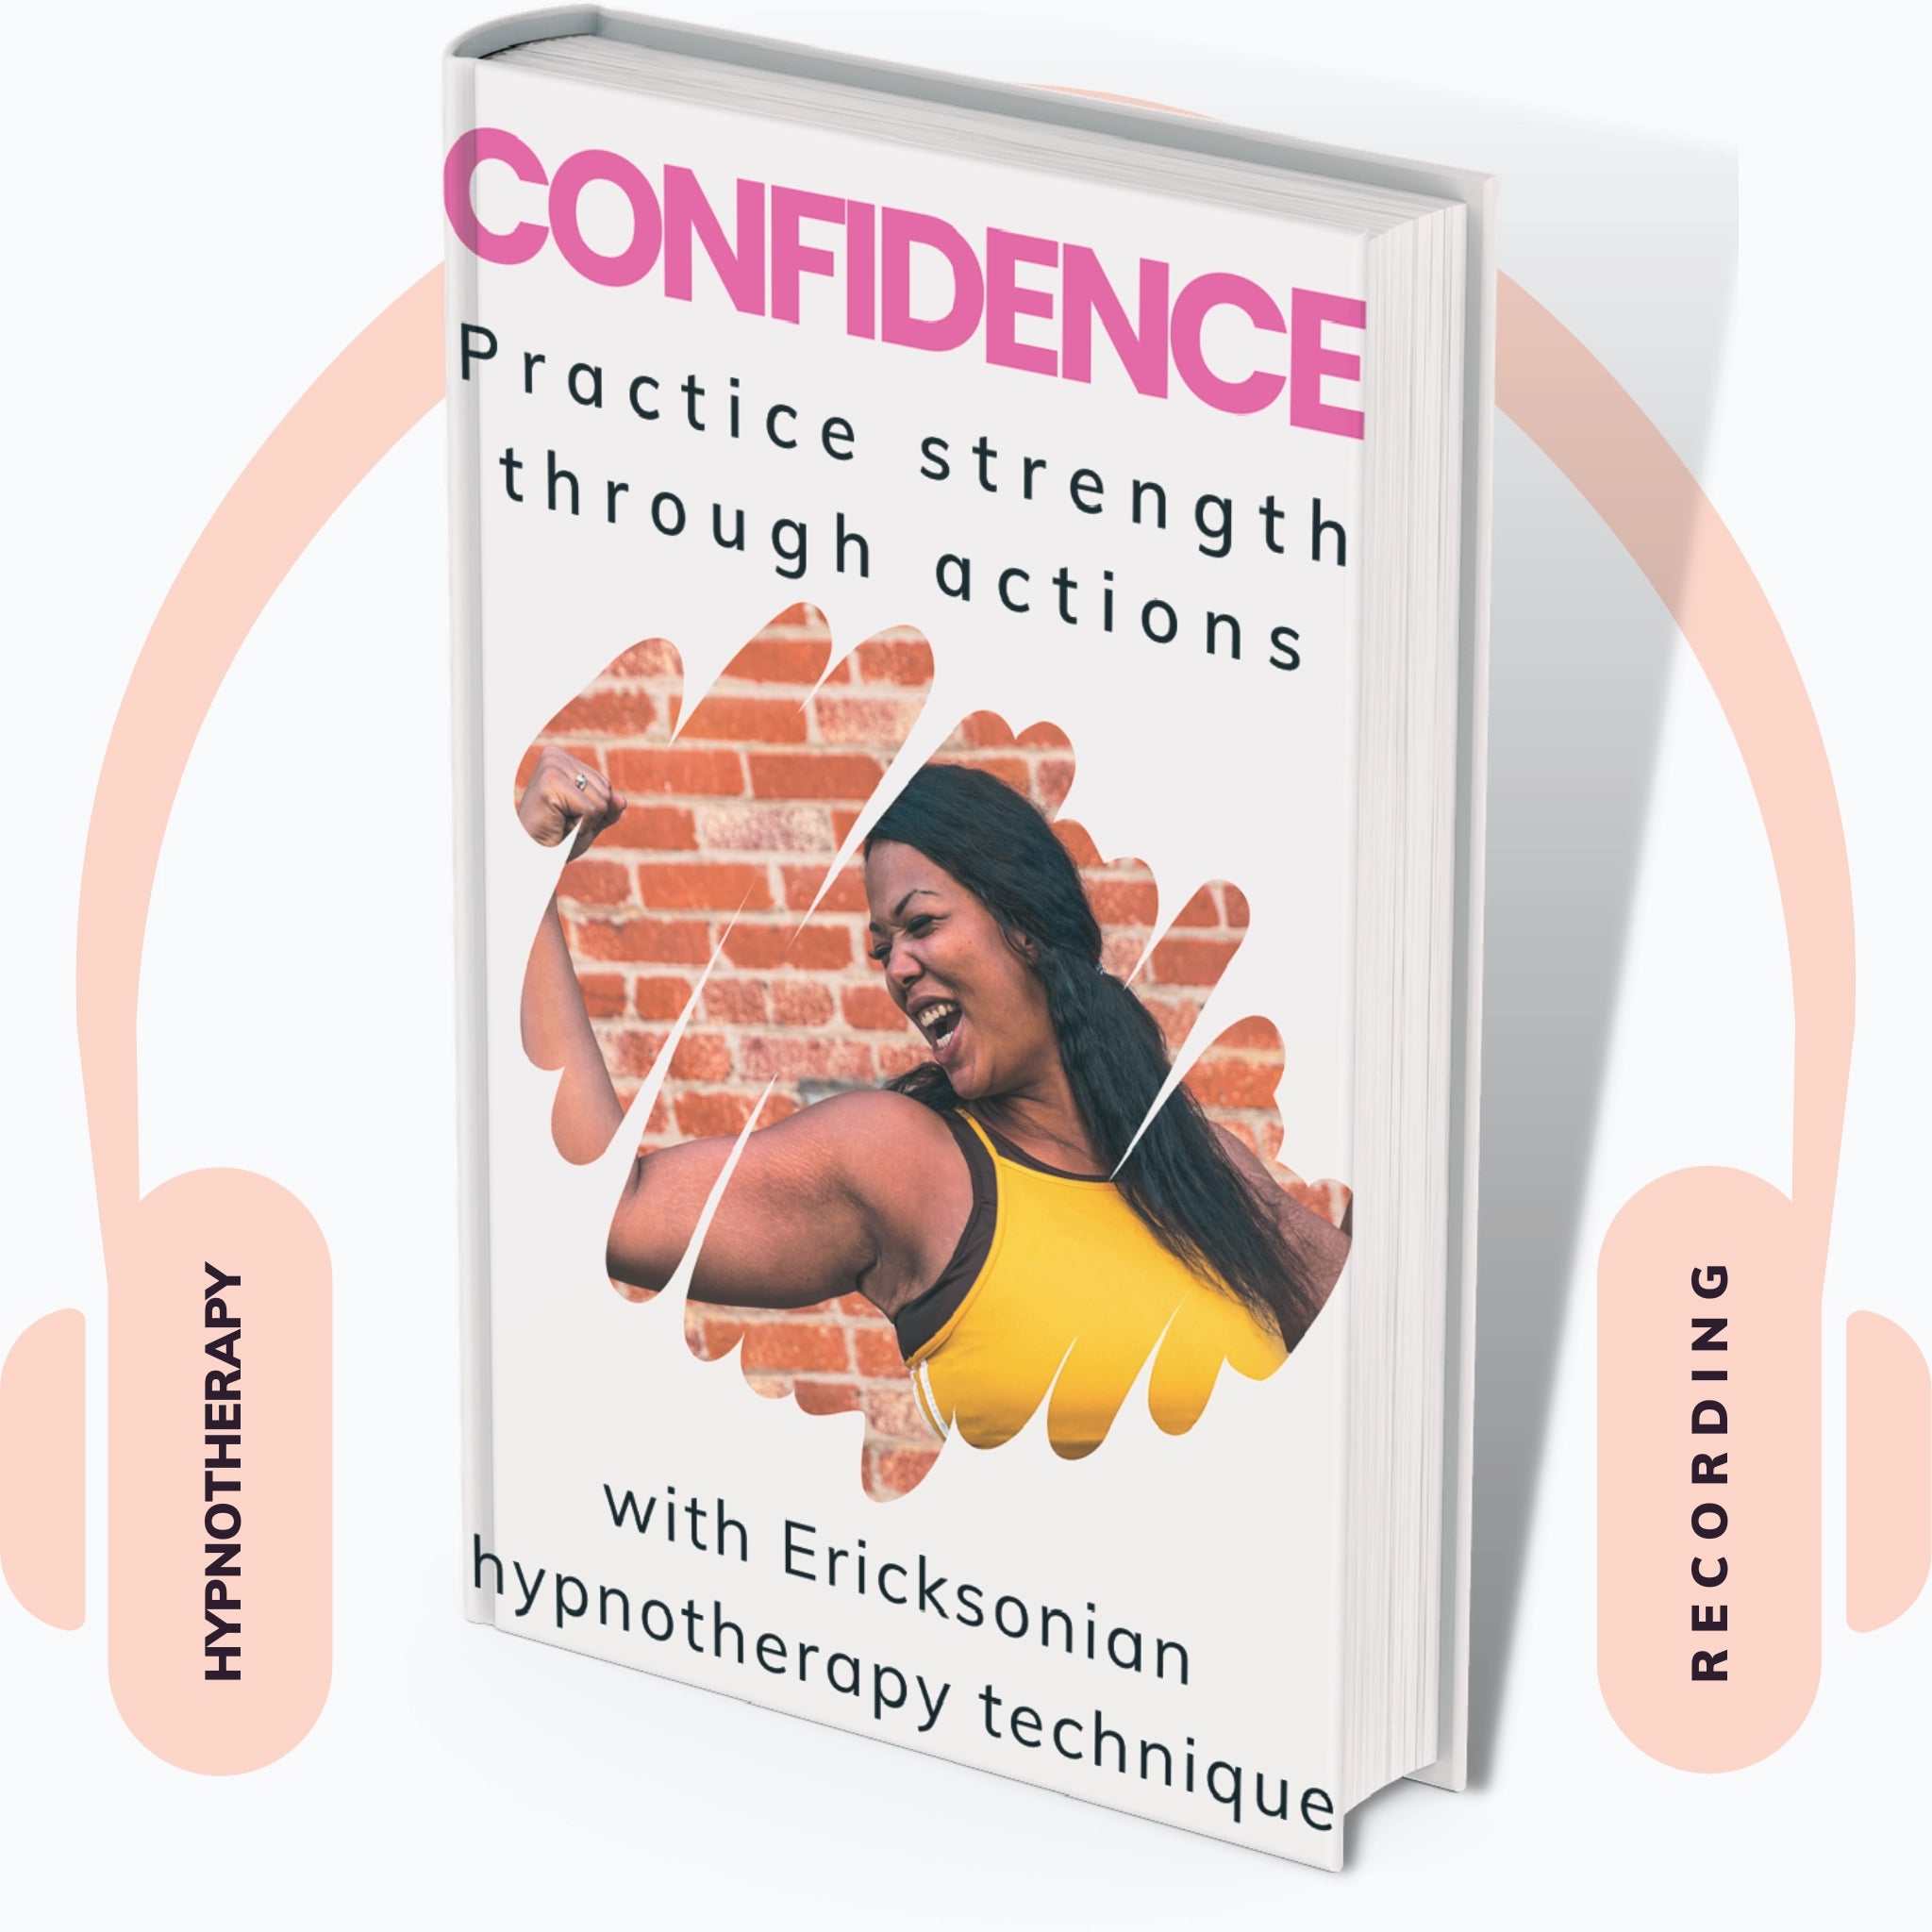 Audiobook cover: Confidence, Practice strength through actions, with Ericksonian hypnotherapy technique